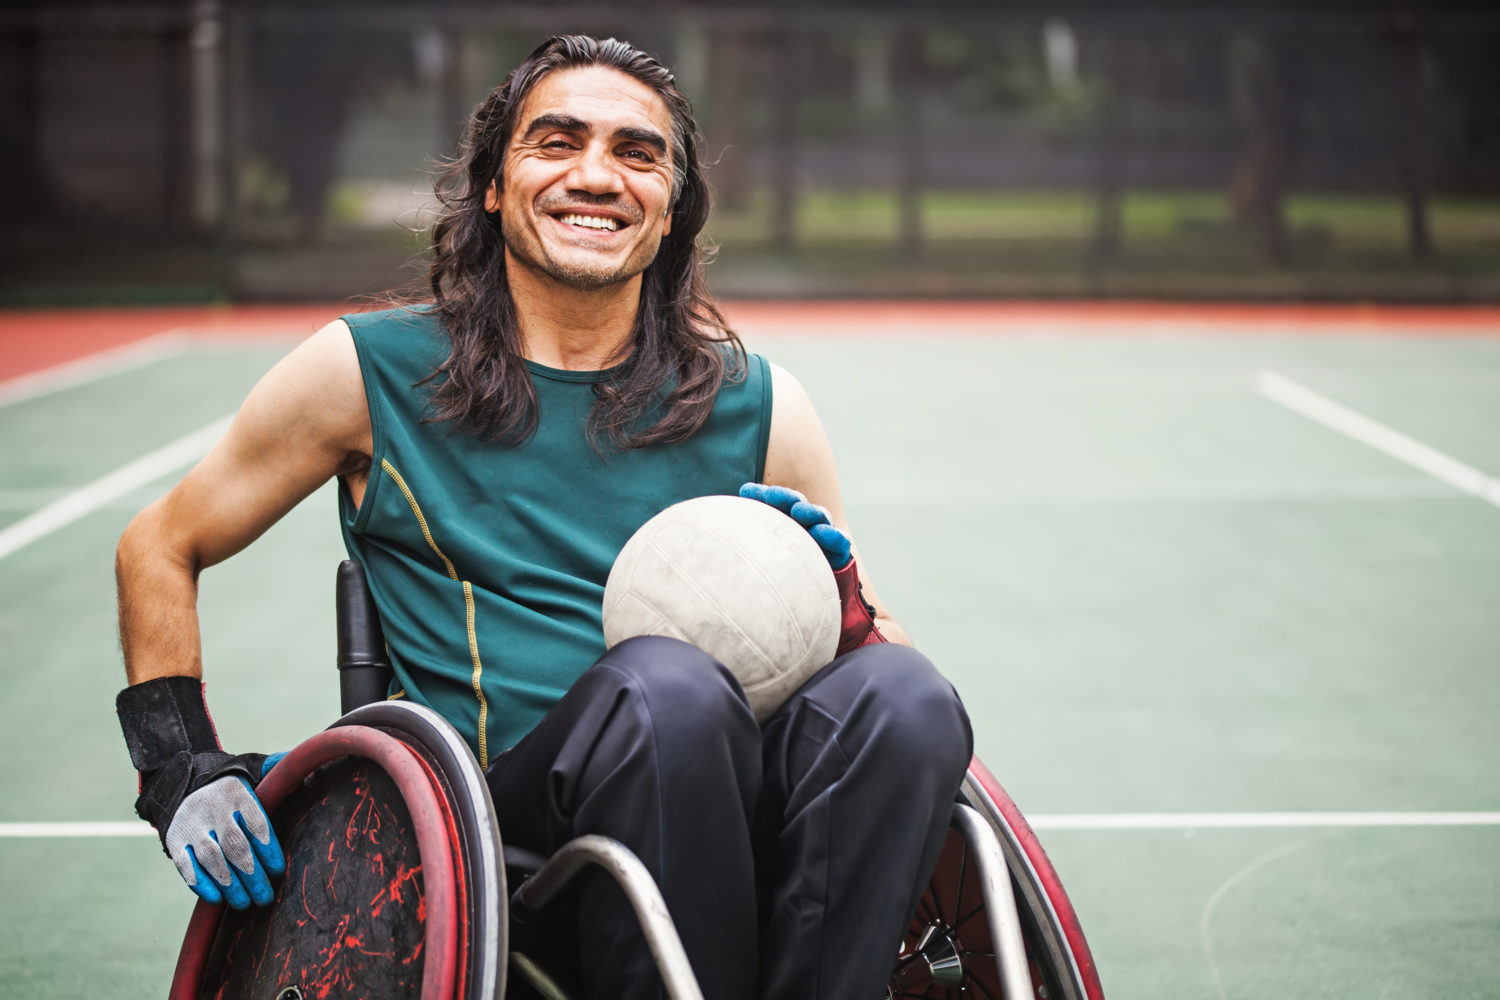 National Disability Services (NDS) releases its seven priorities for disability services in 2021